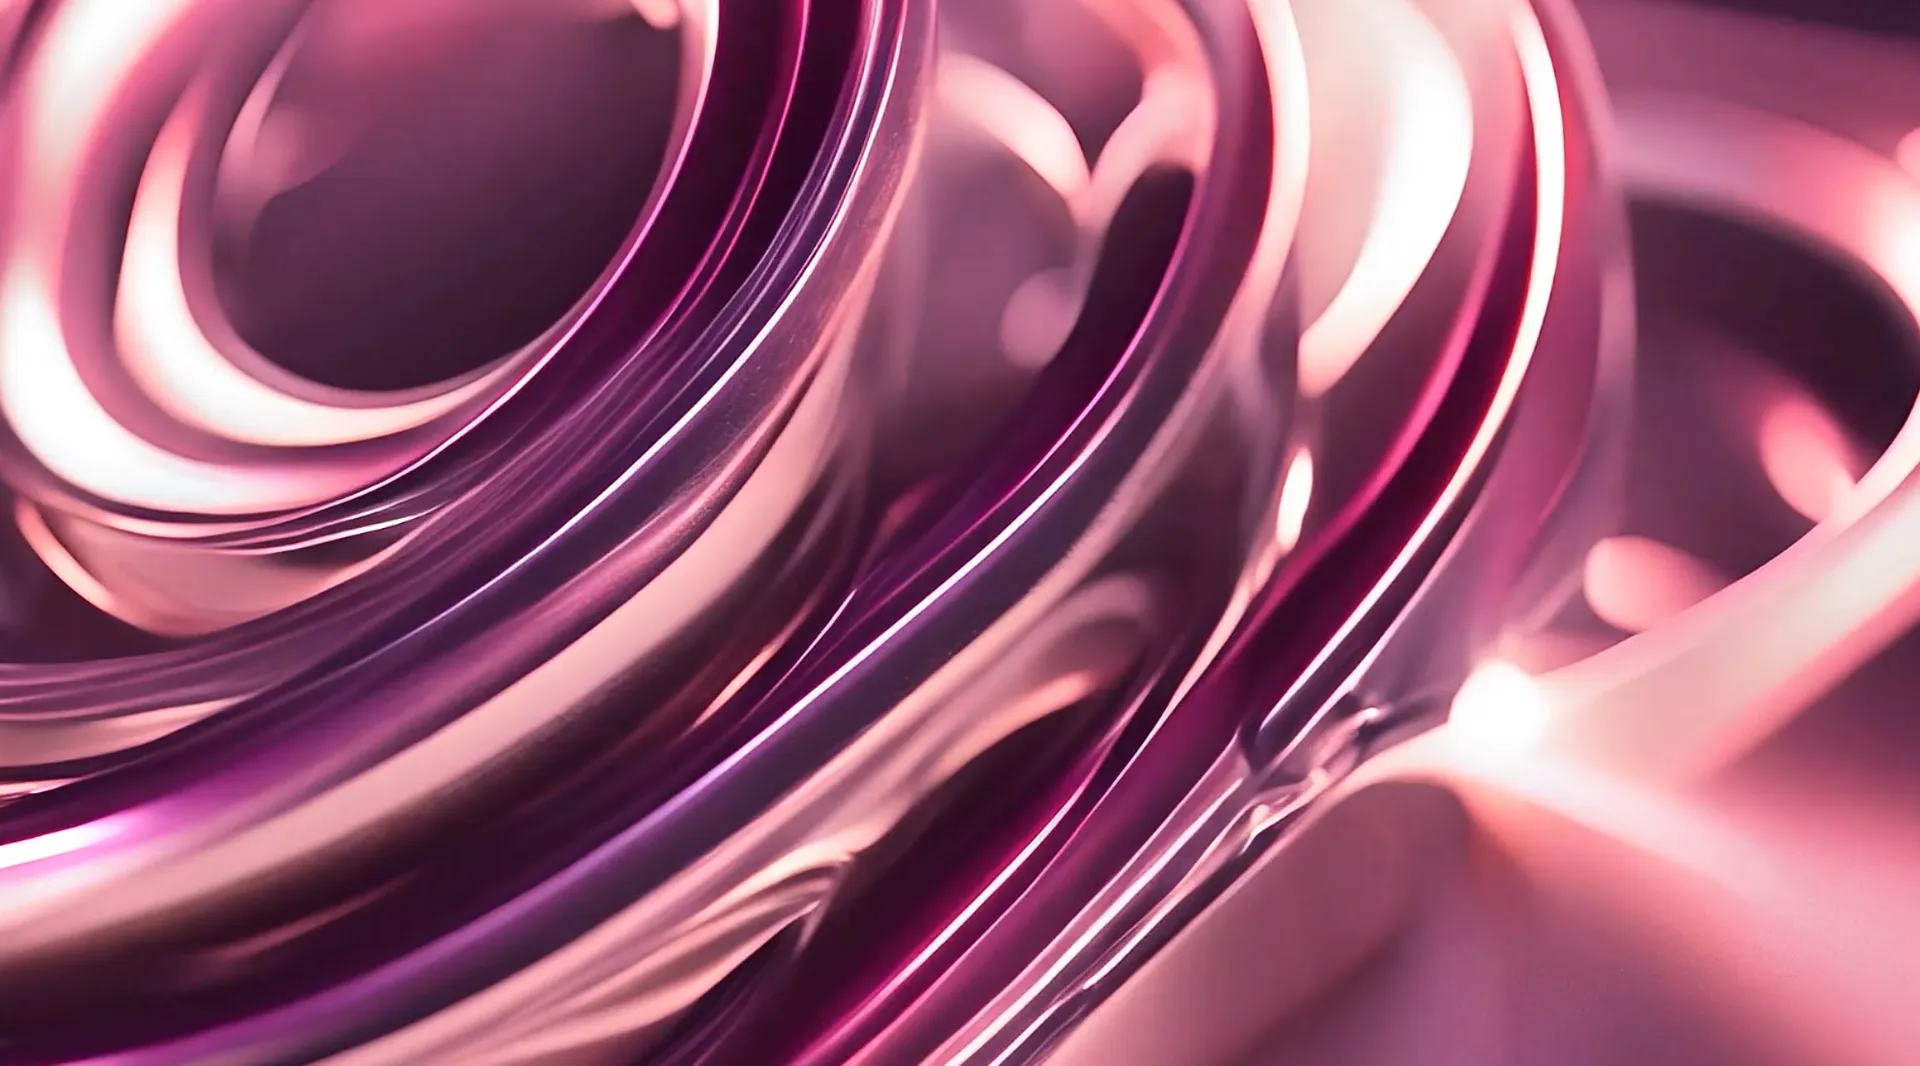 Abstract Pink and White Flowing Lines